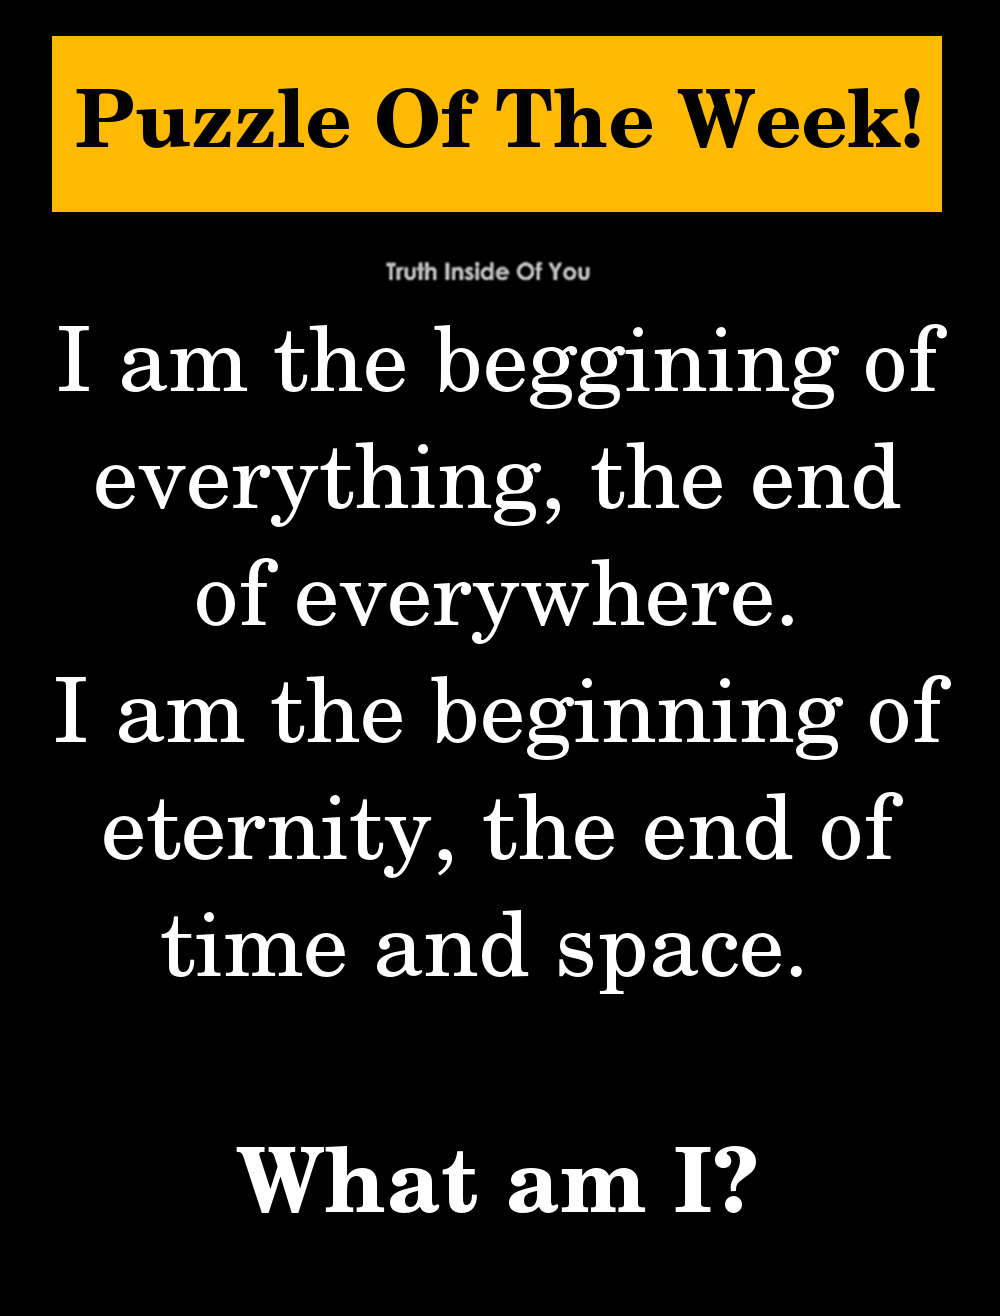 I am the beggining of everything, the end of everywhere. I am the beginning of eternity, the end of time and space. What am I?